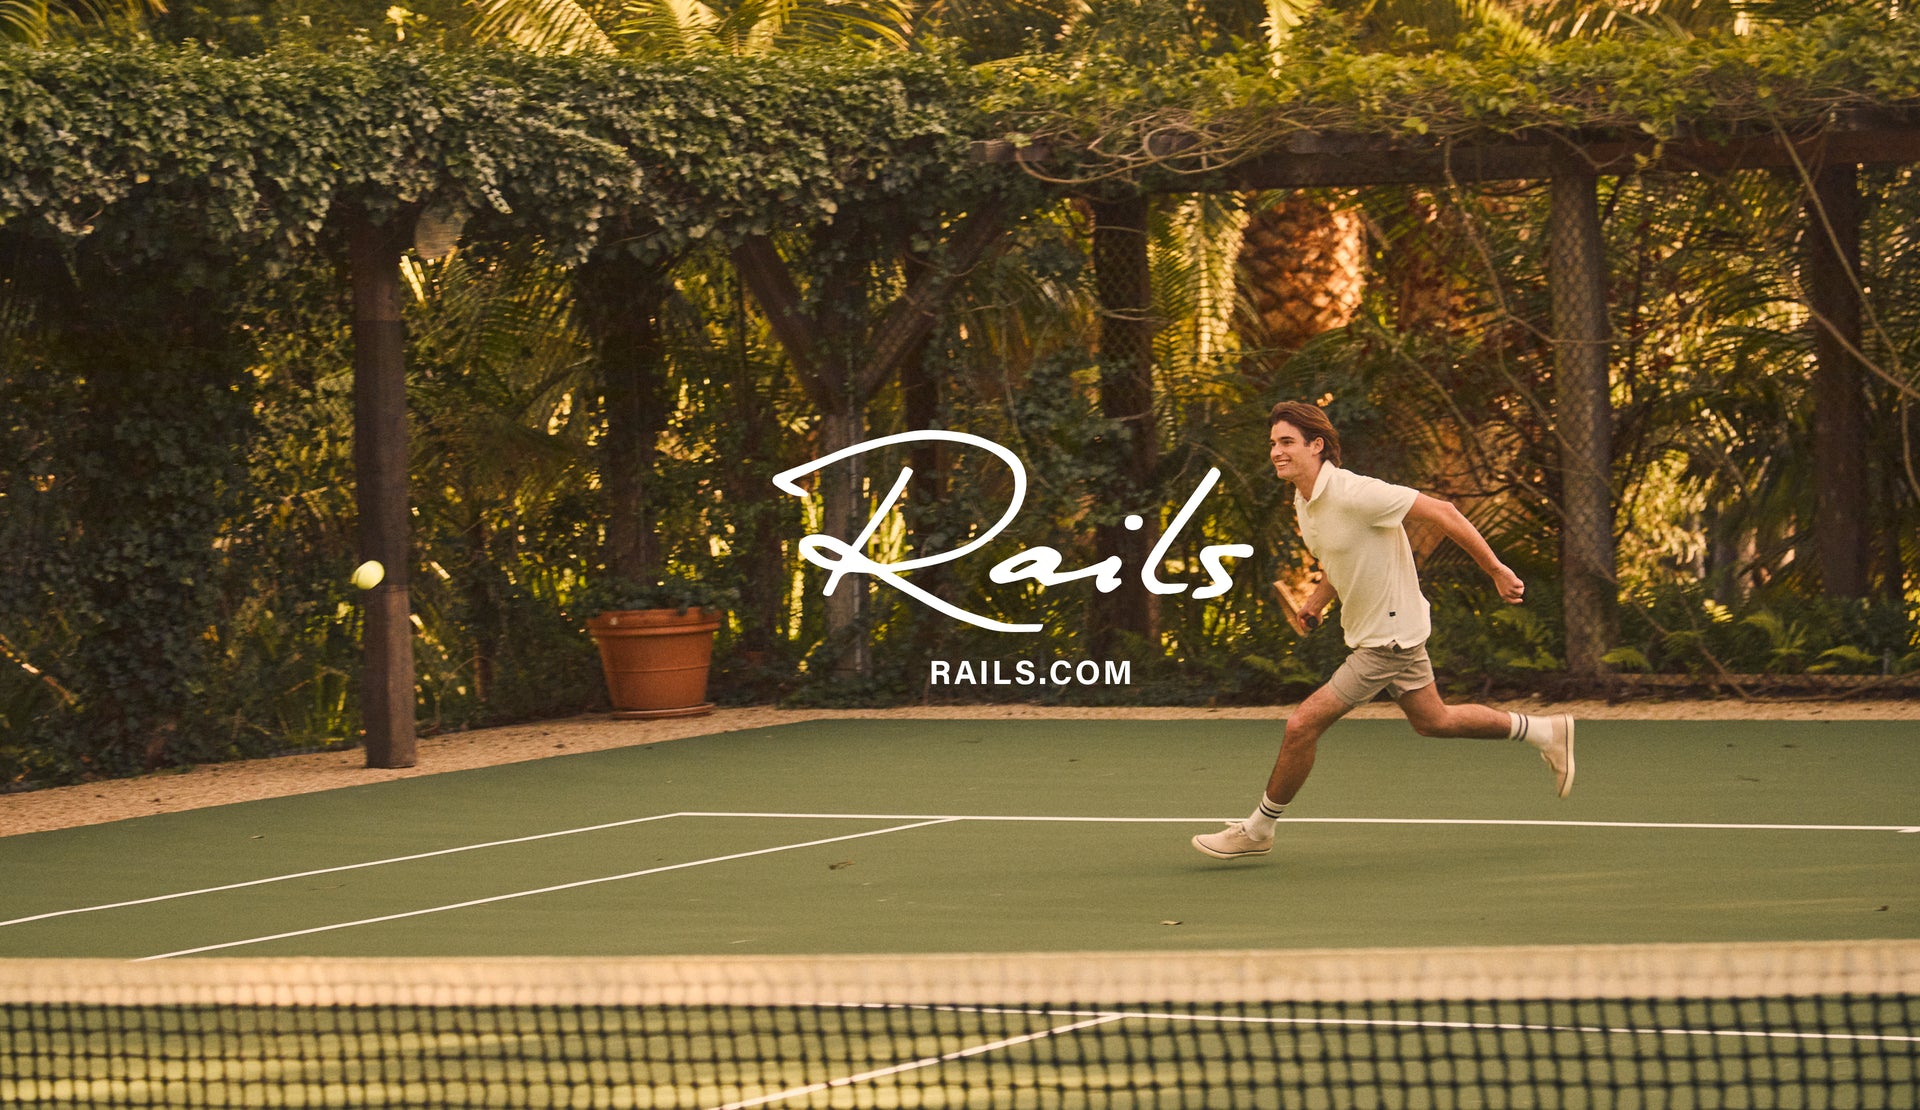 EDITORIAL IMAGE OF MODEL PLAYING TENNIS WEARING RHEN POLO SHIRT IN TERRY PEARL AND CRUZ SHORTS IN WASHED GREY